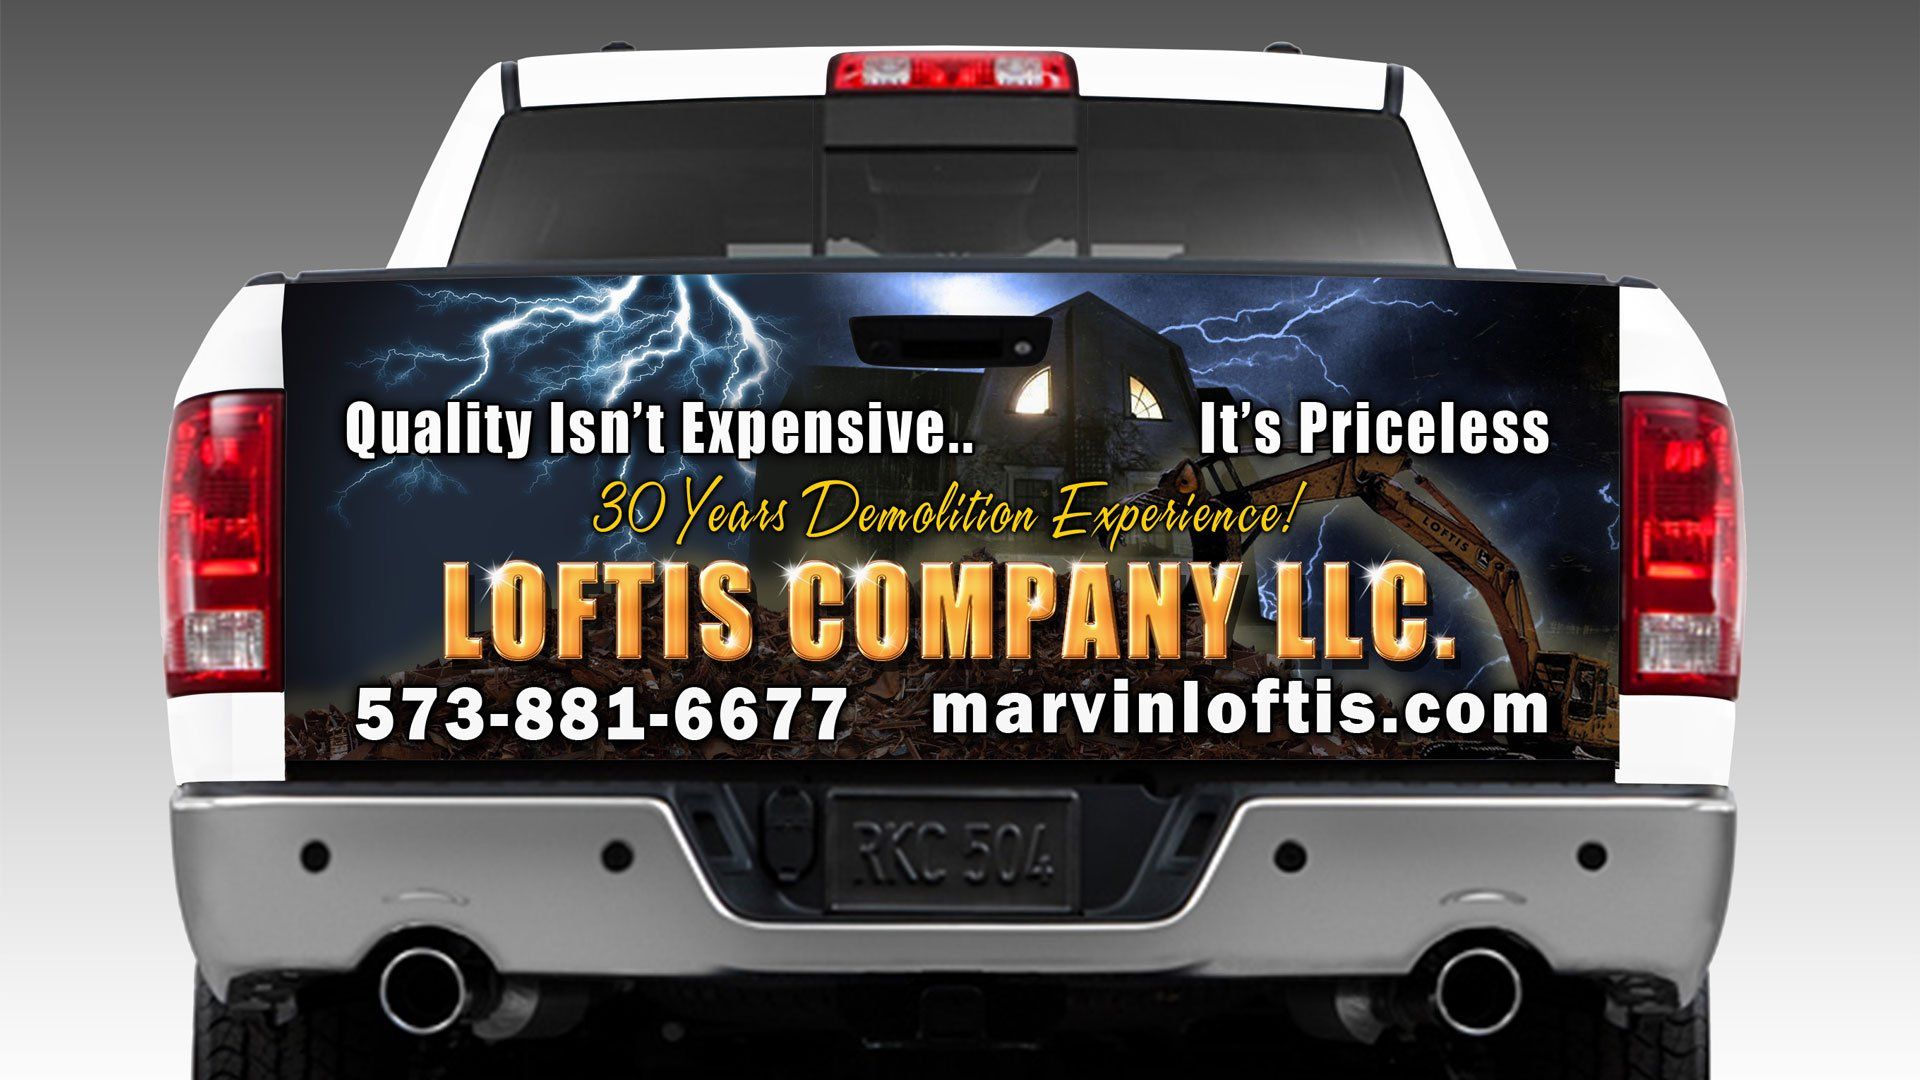 Get An Estimate from the Loftis Company Today!